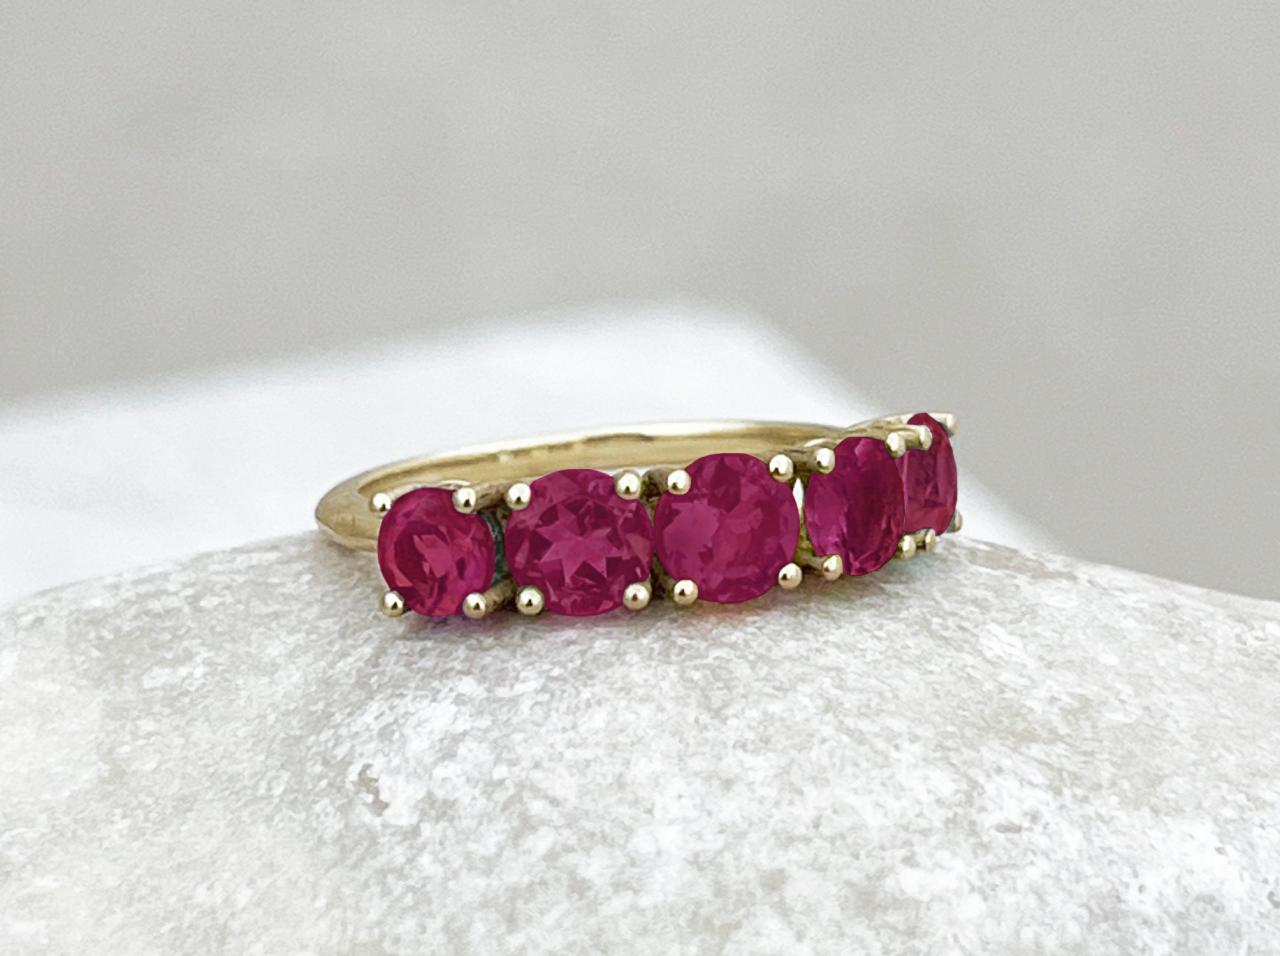 Solid gold engagement ring with natural ruby, Wedding half eternity gemstone ring, 9k/18k round stones prong set promise ring